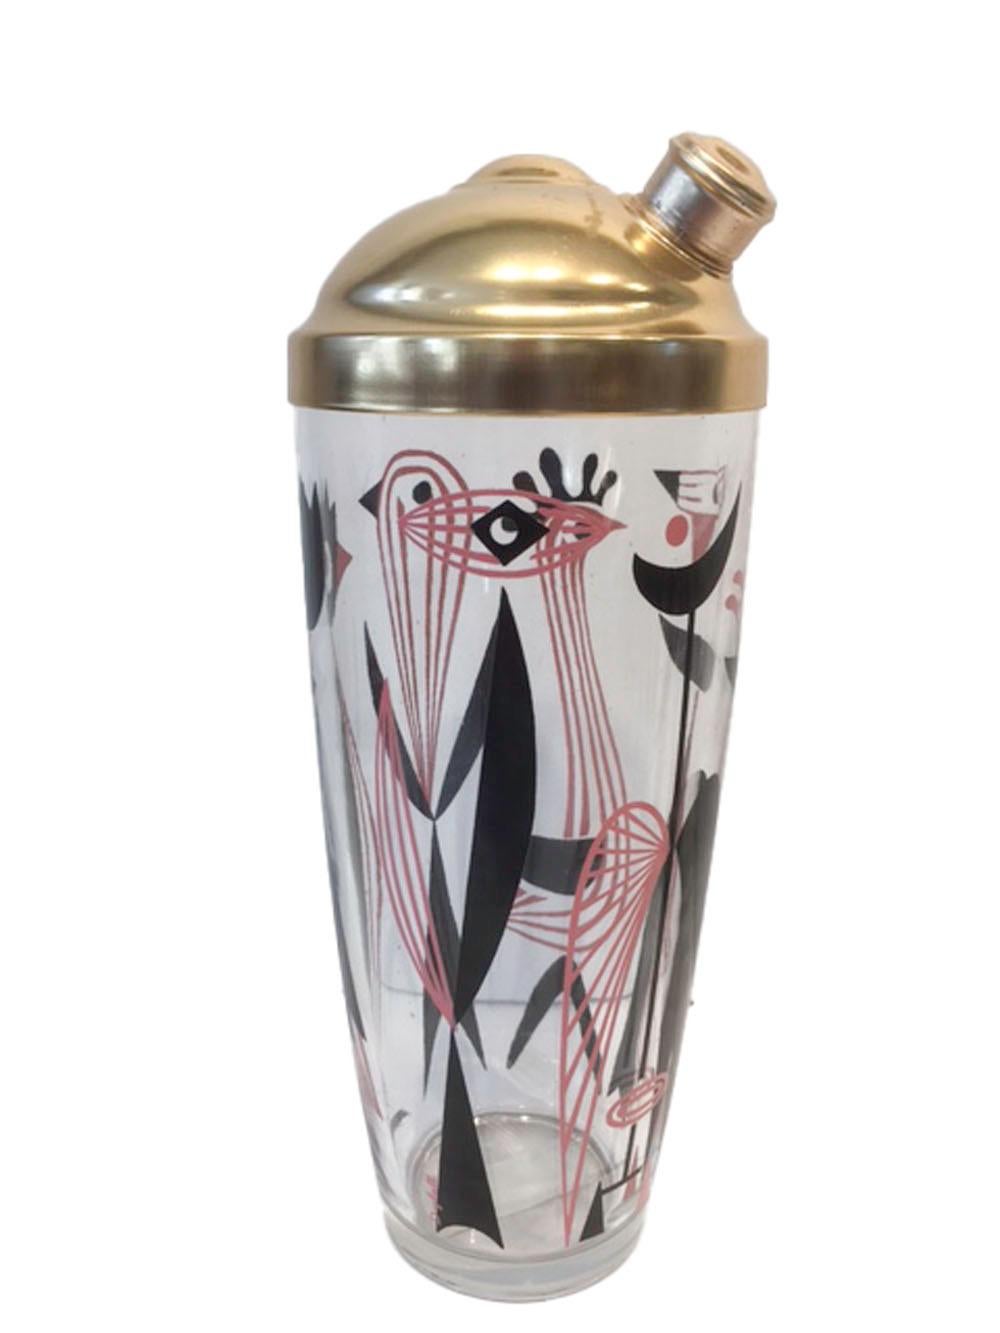 Vintage Dyball barware set consisting of a cocktail shaker with matte gold aluminum cover and four cocktail glasses along with six highball glasses - each piece decorated with stylized birds in pink and black enamel. All in excellent